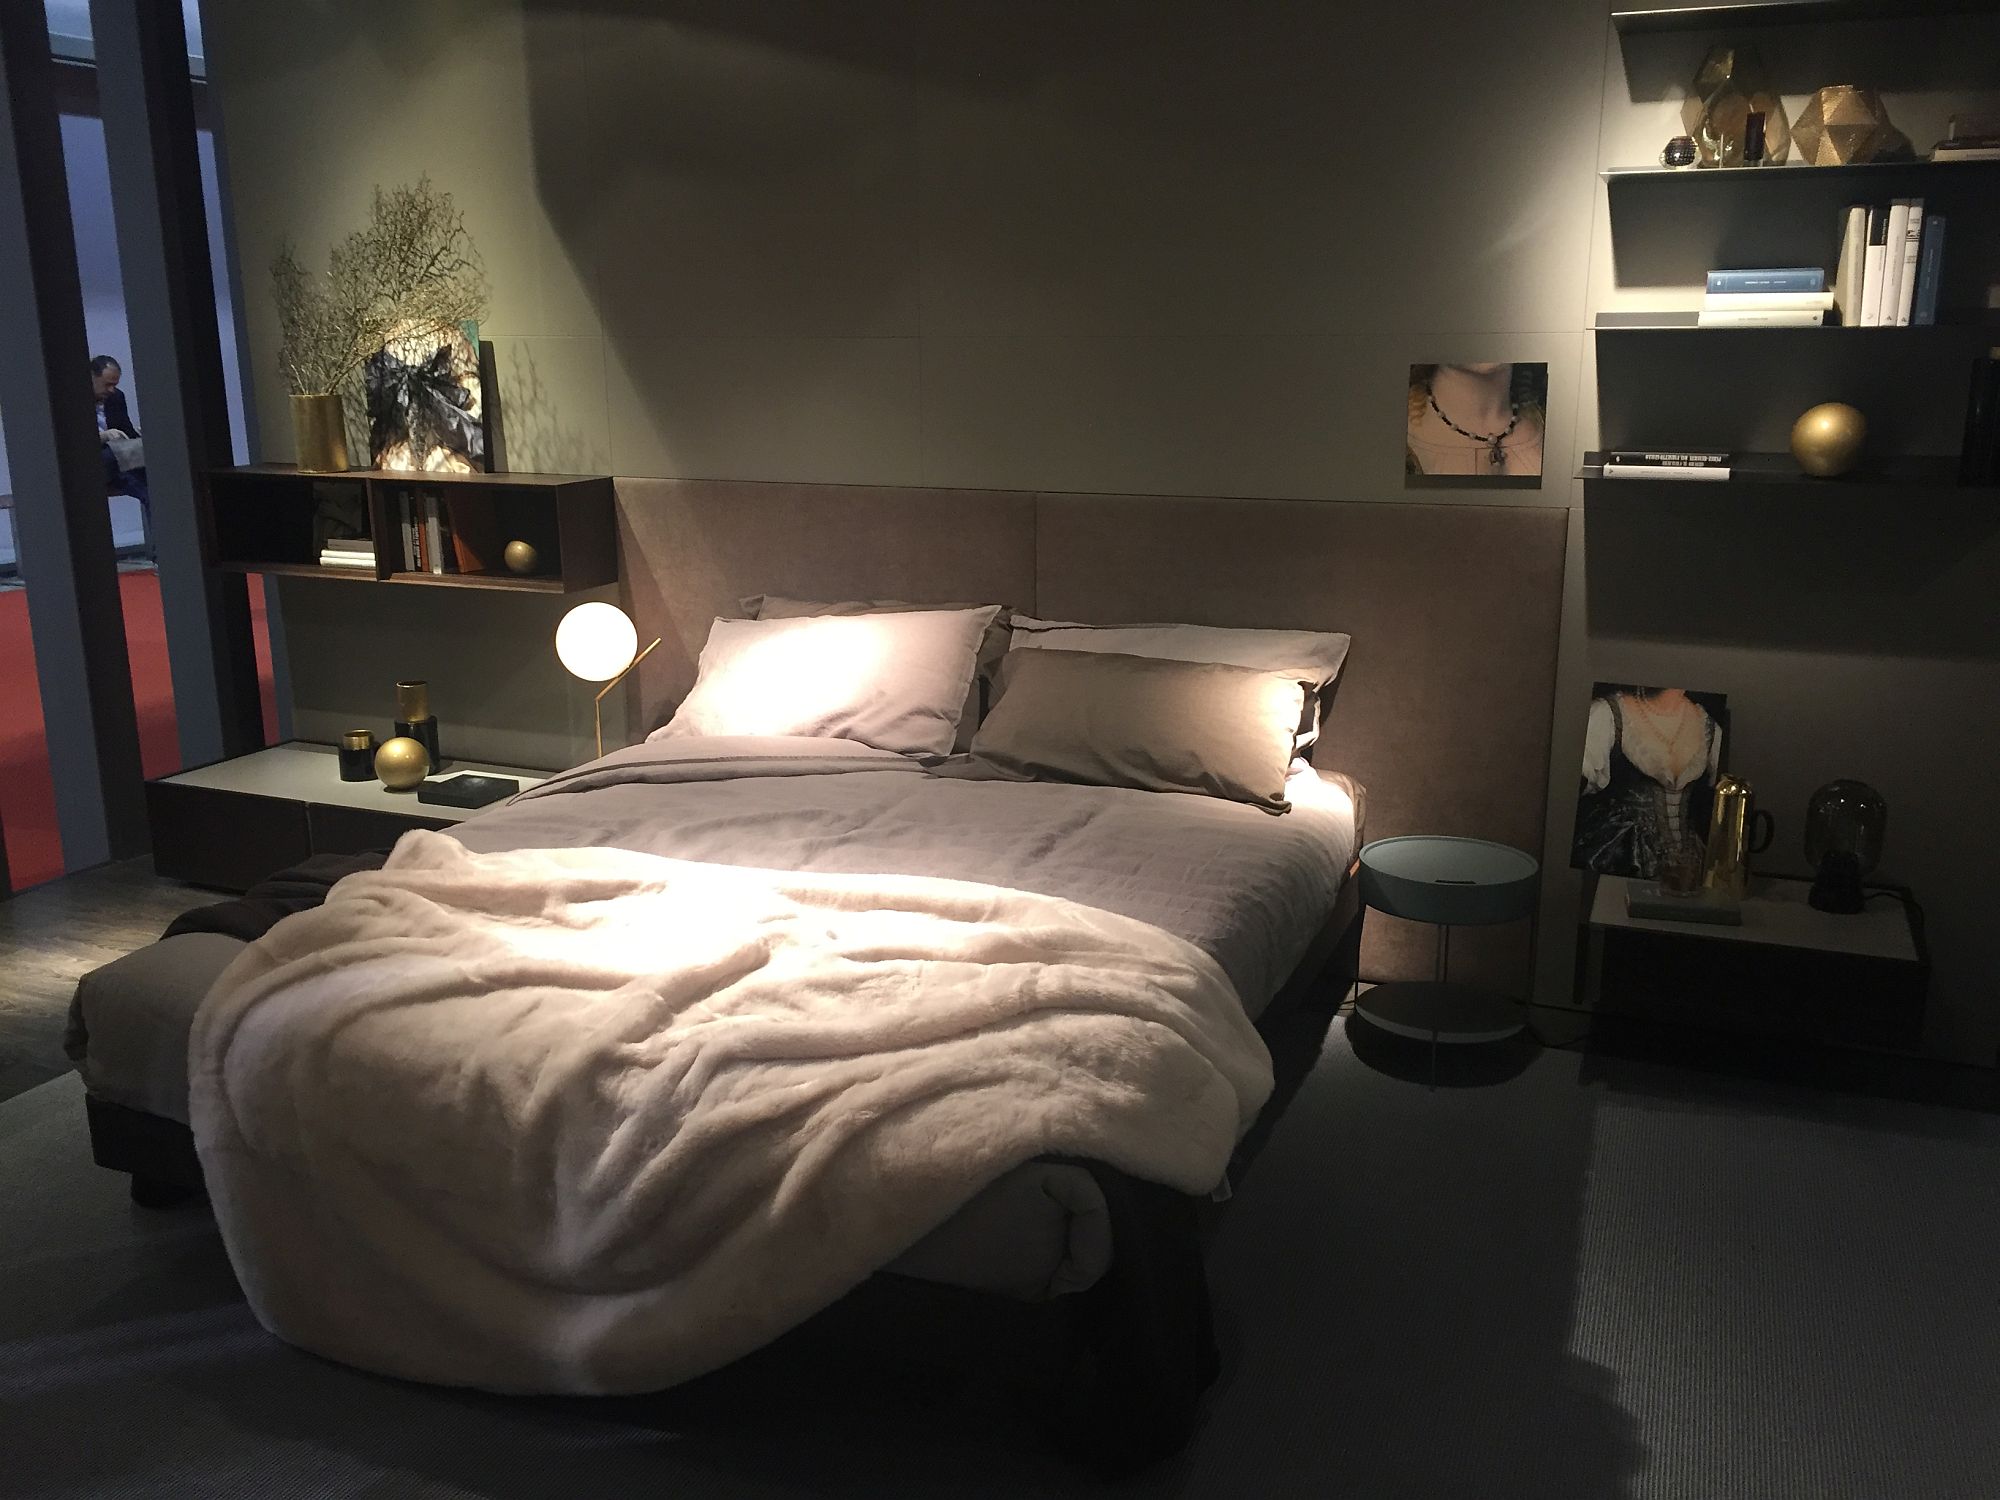 Headboard of the bed becomes one with the floating shelves and nightstands next to it